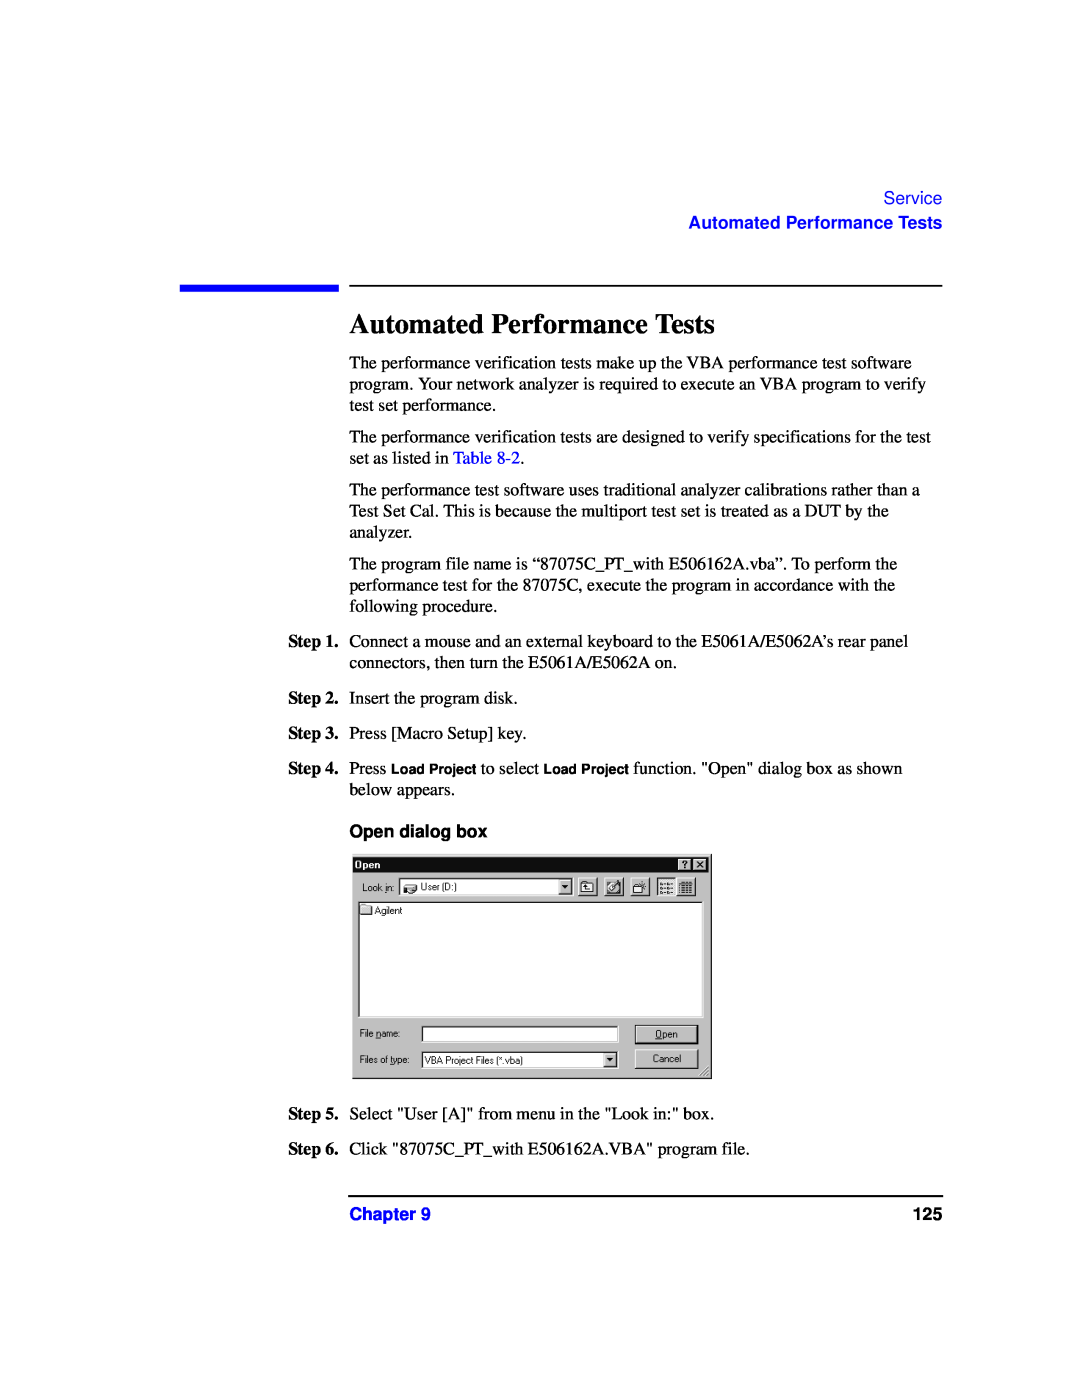 Agilent Technologies 87075C manual Automated Performance Tests, Service, Open dialog box, Chapter 